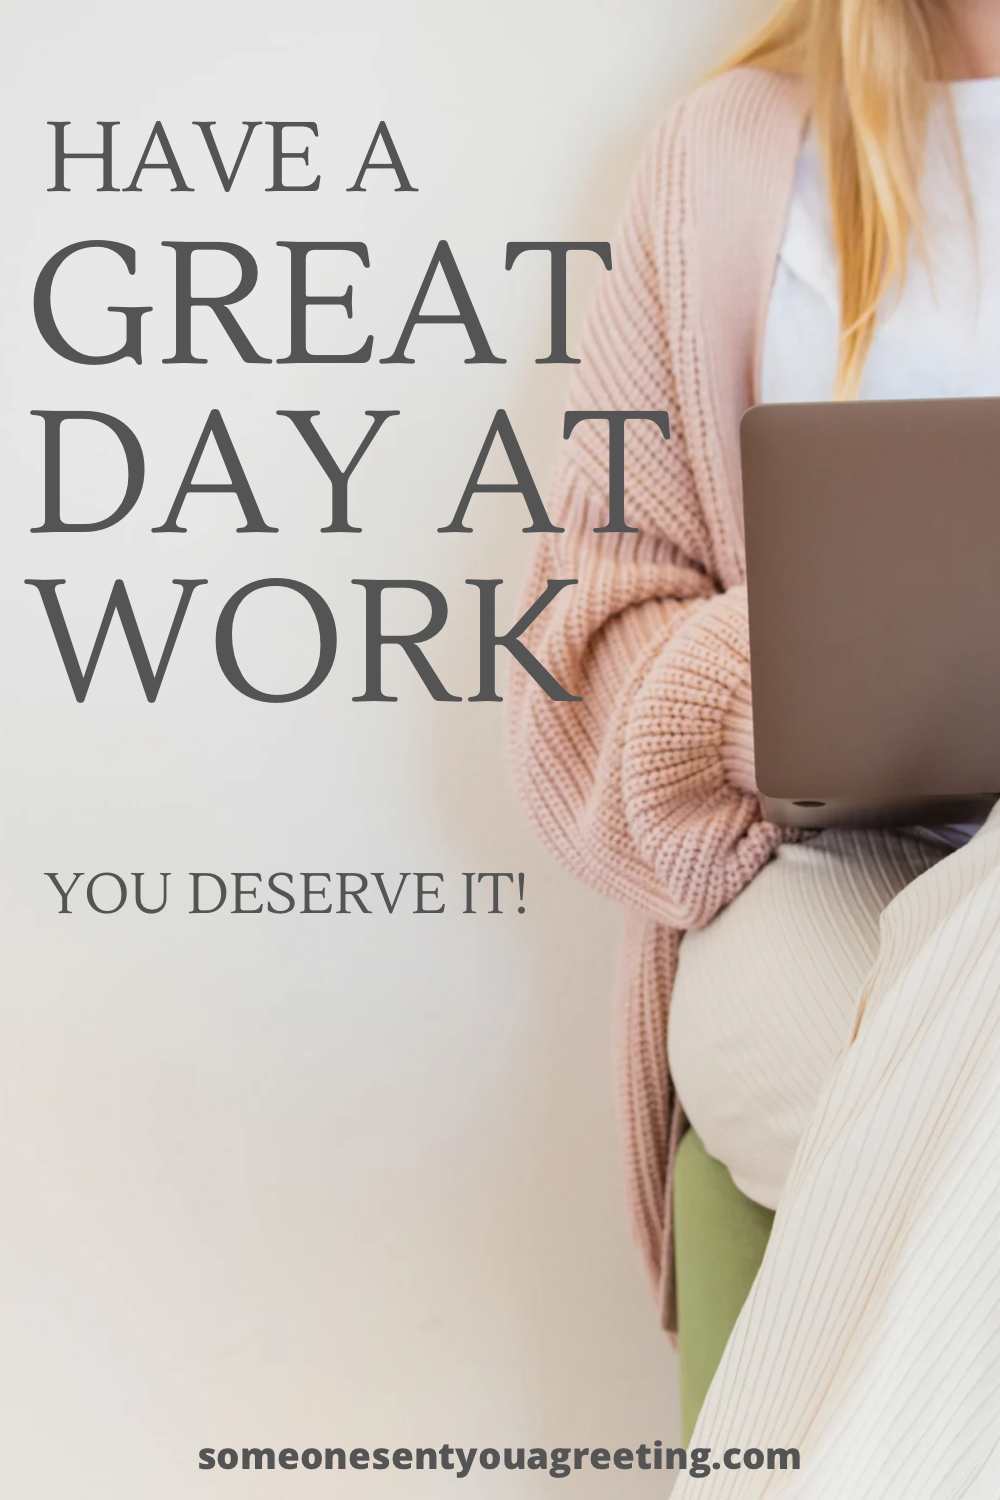 have a great day at work wishes